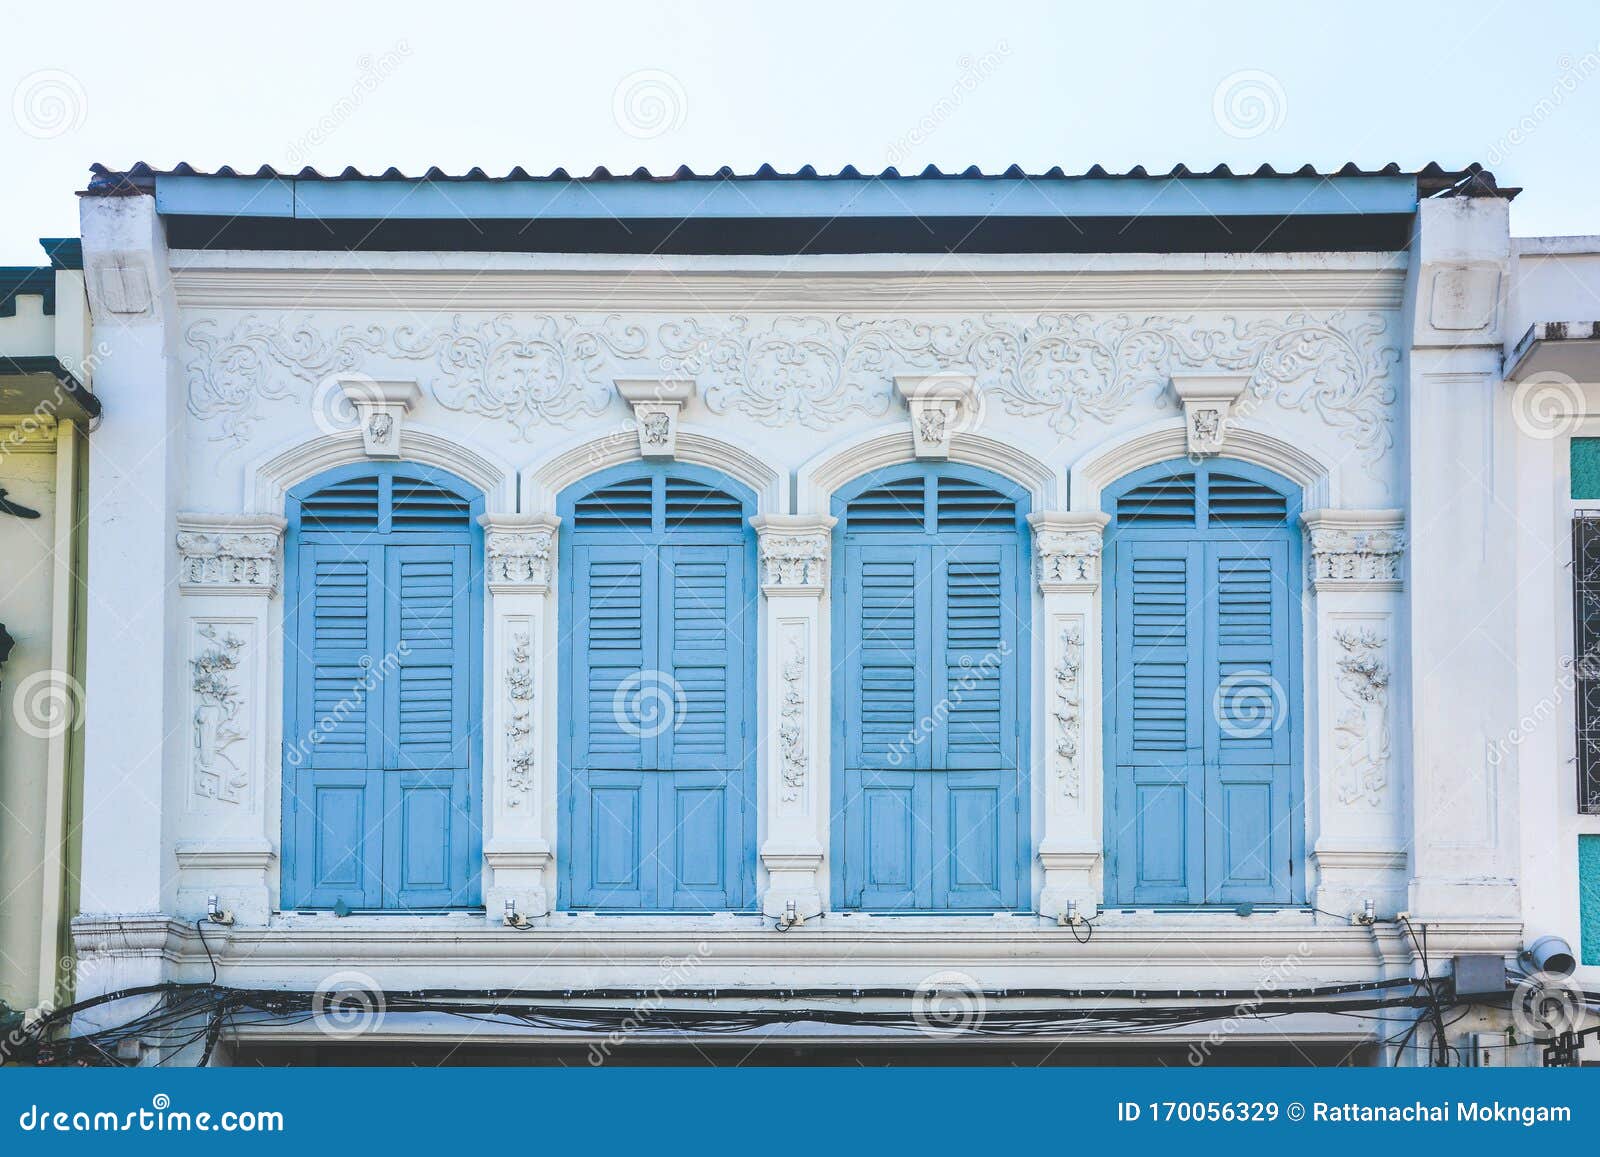 blue color wooden arched window on white cement wall in chino portuguese style at phuket old town, thailand